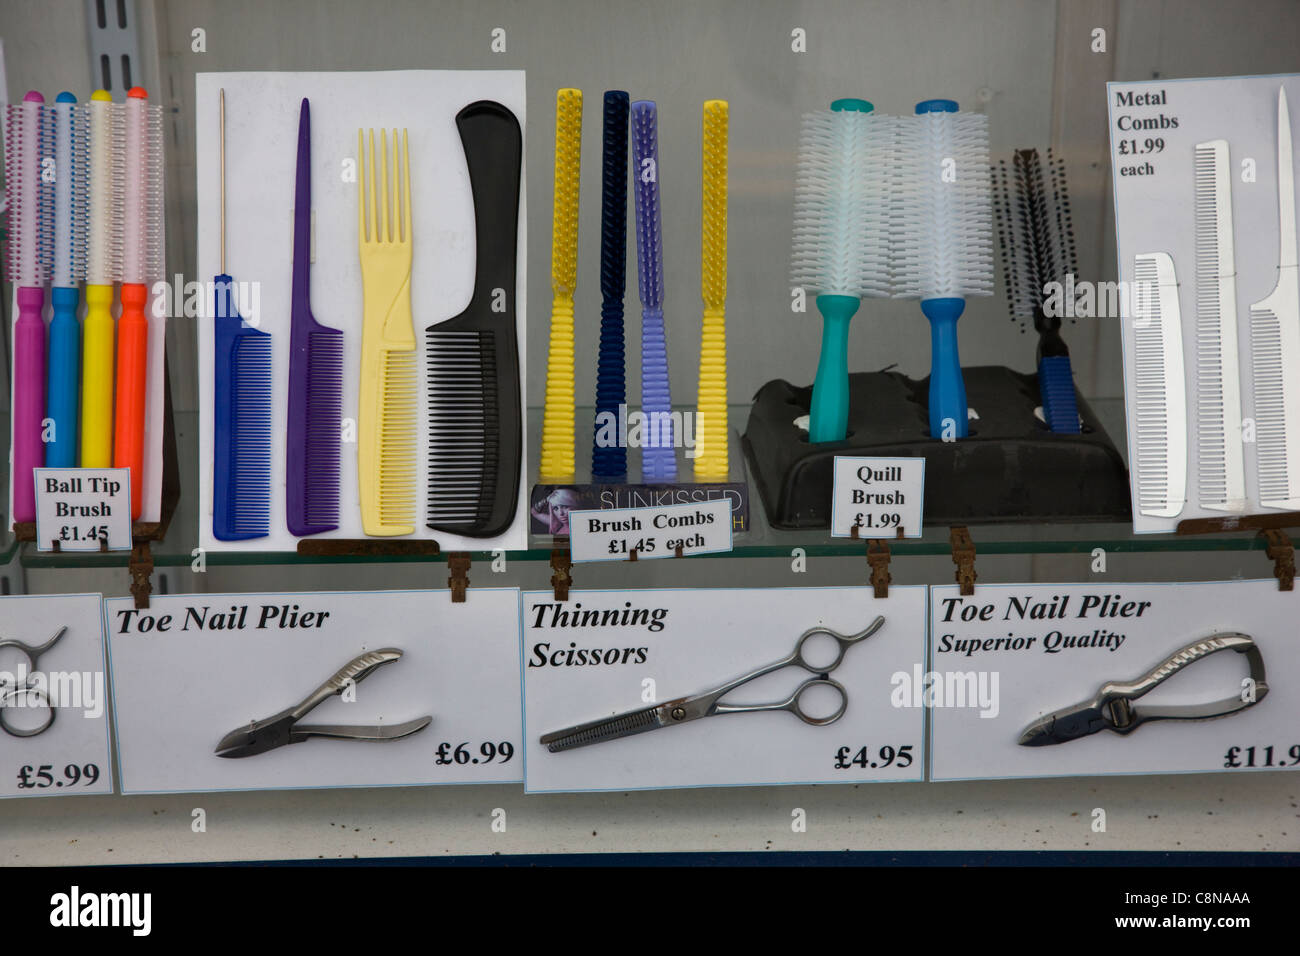 Hair brushes, clippers, scissors and other hairdressing equipment in a chemist's window in Blackpool, UK Stock Photo